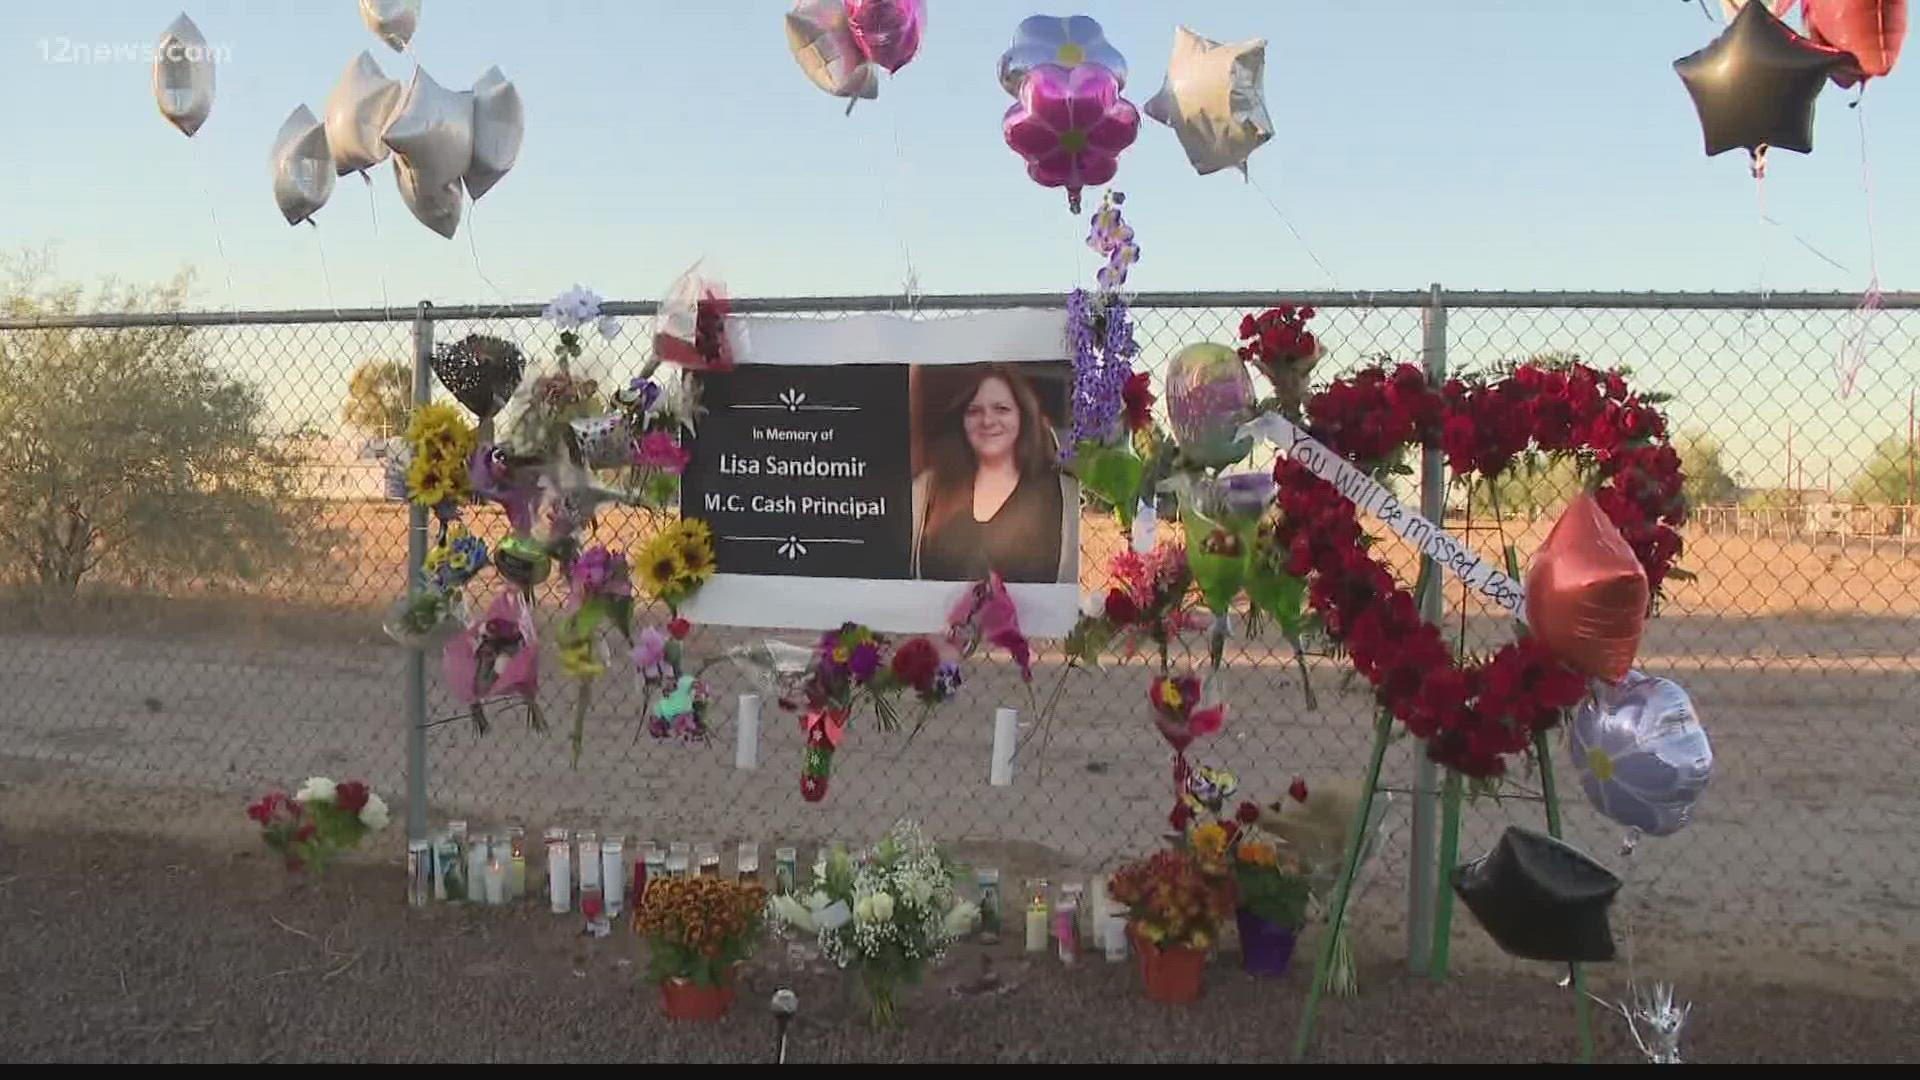 Lisa Sandomir, a principal in Phoenix's Laveen School District, died Wednesday from injuries she sustained after a car crash.